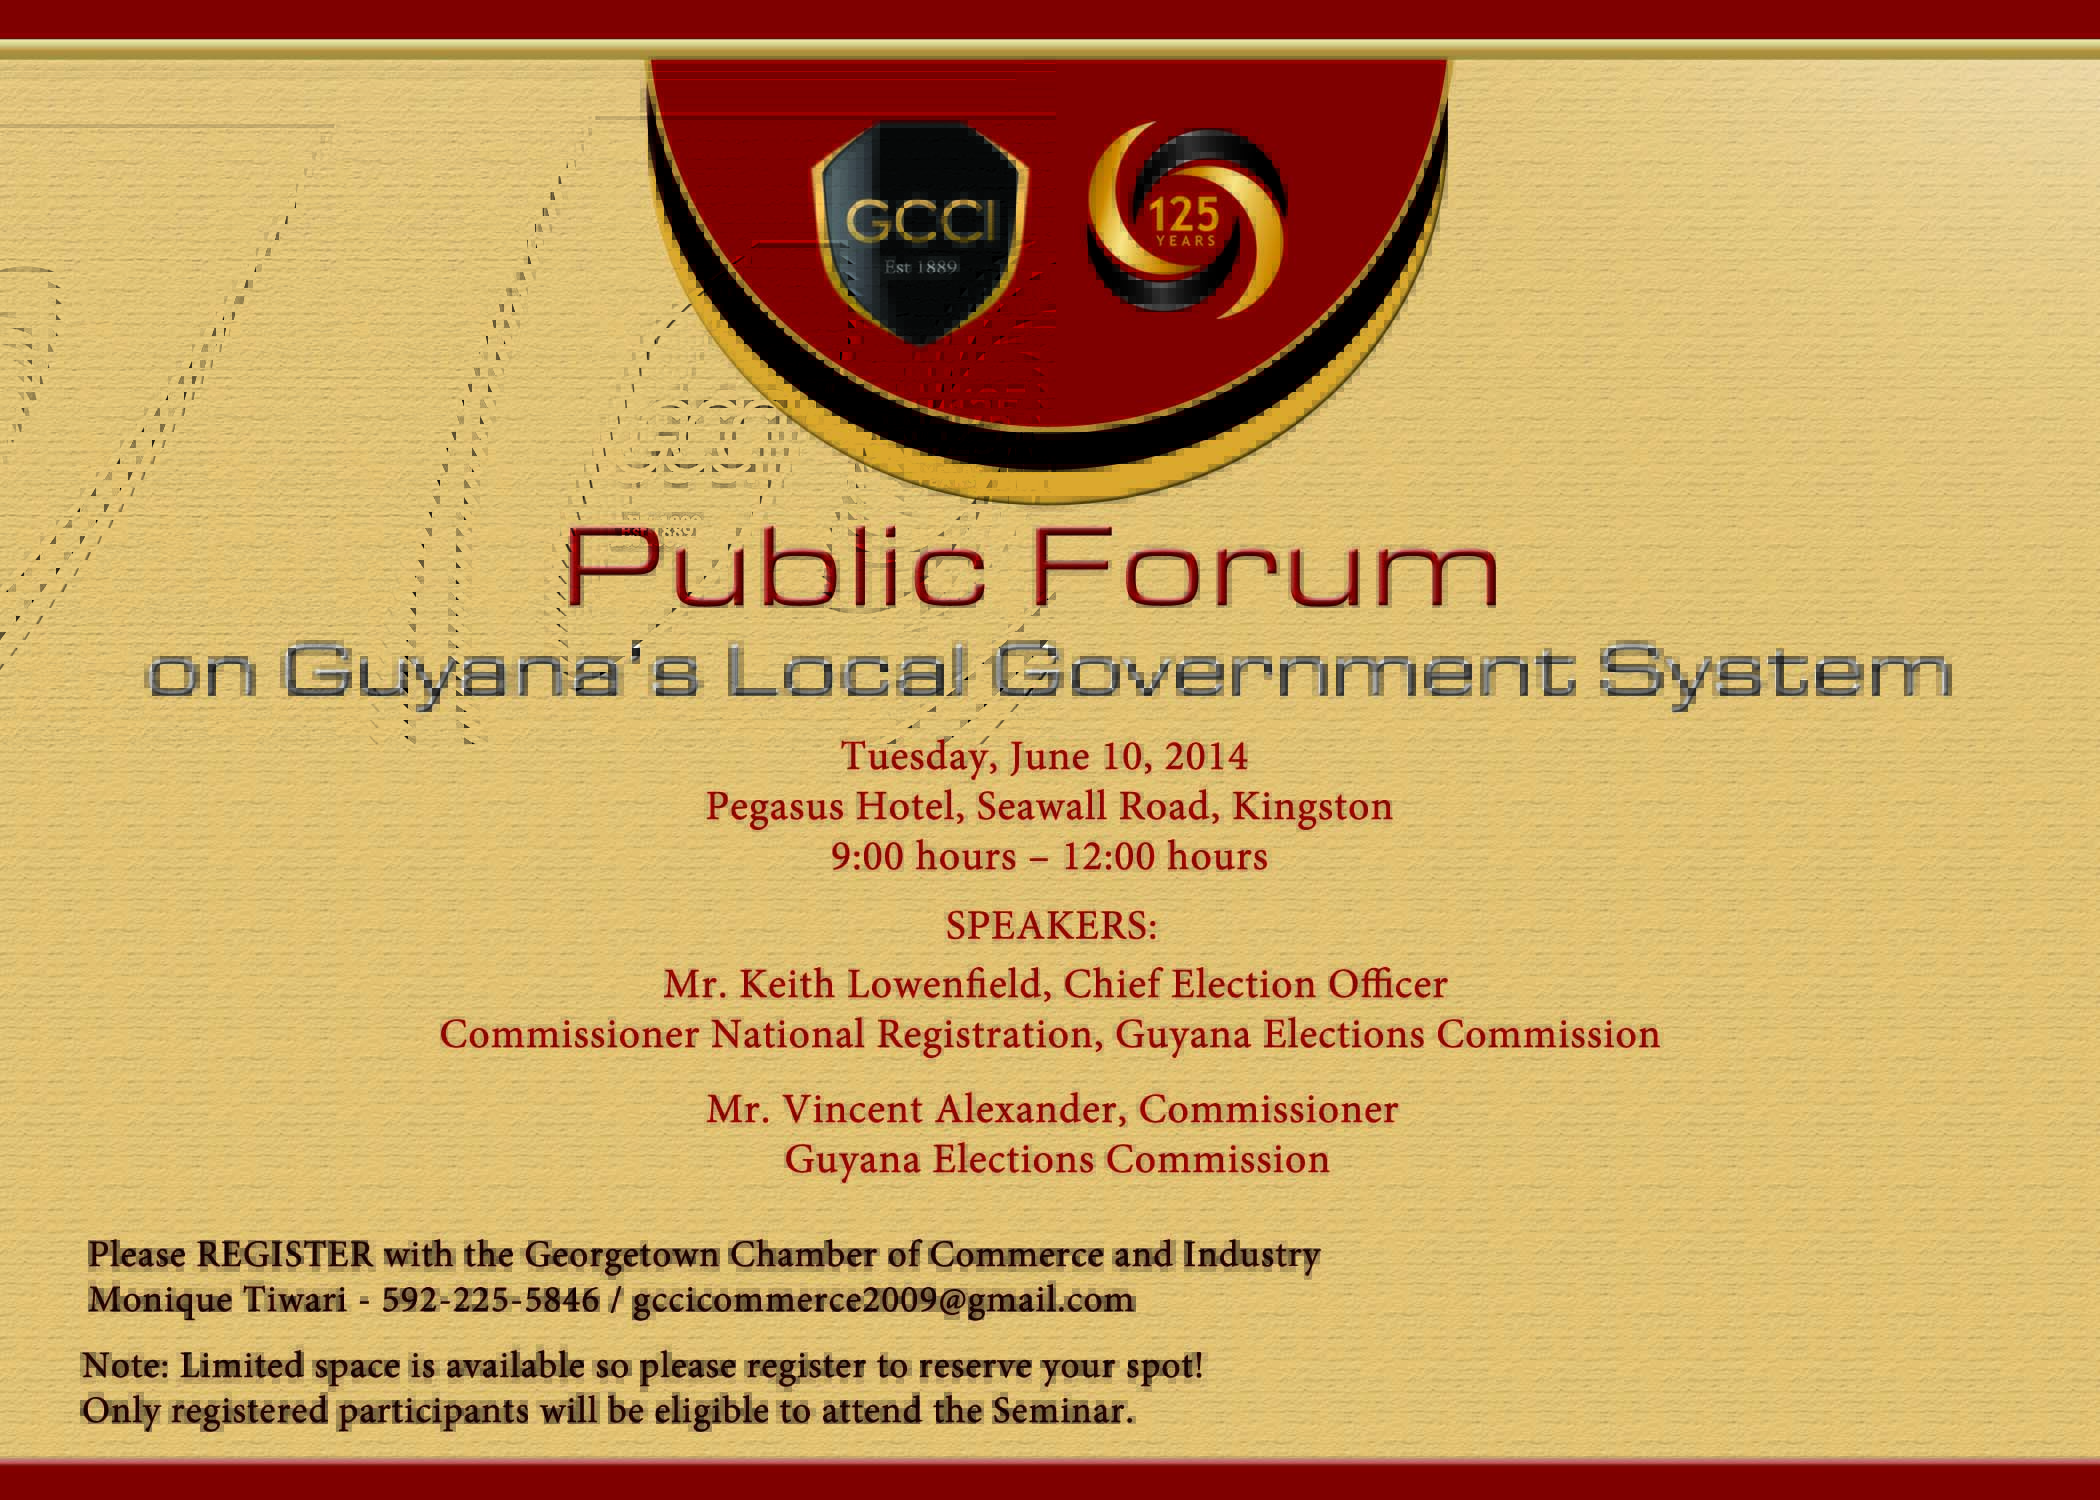 Public Forum on Guyana’s Local Government System – June 10, 2014 at the Pegasus Hotel